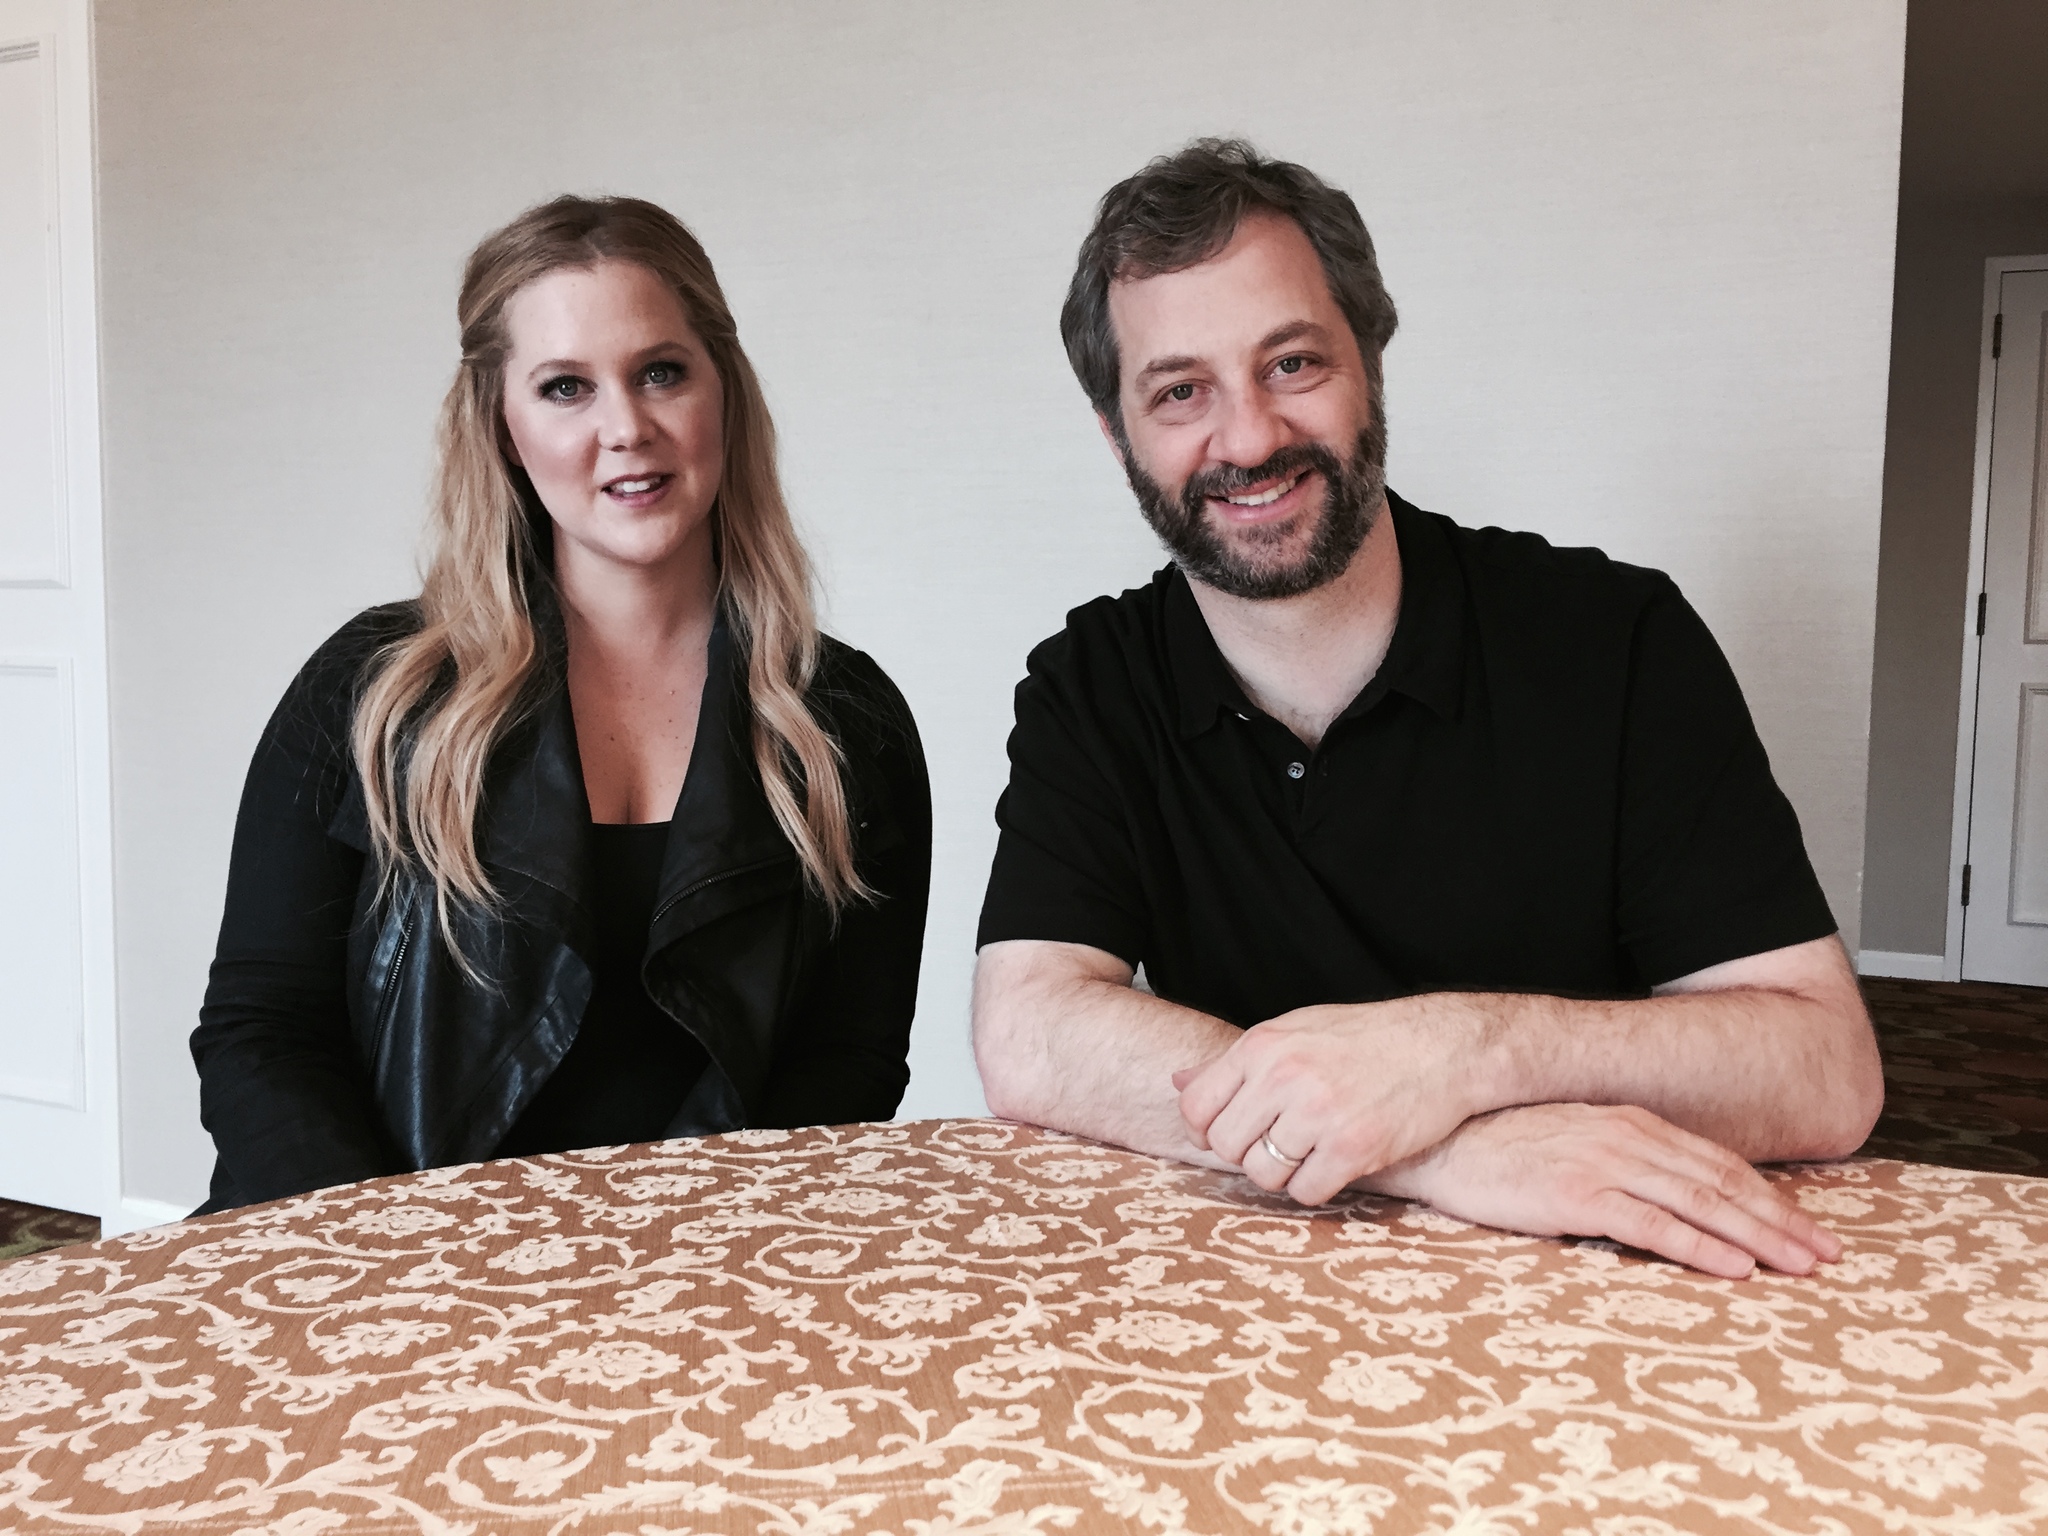 Judd Apatow and Amy Schumer